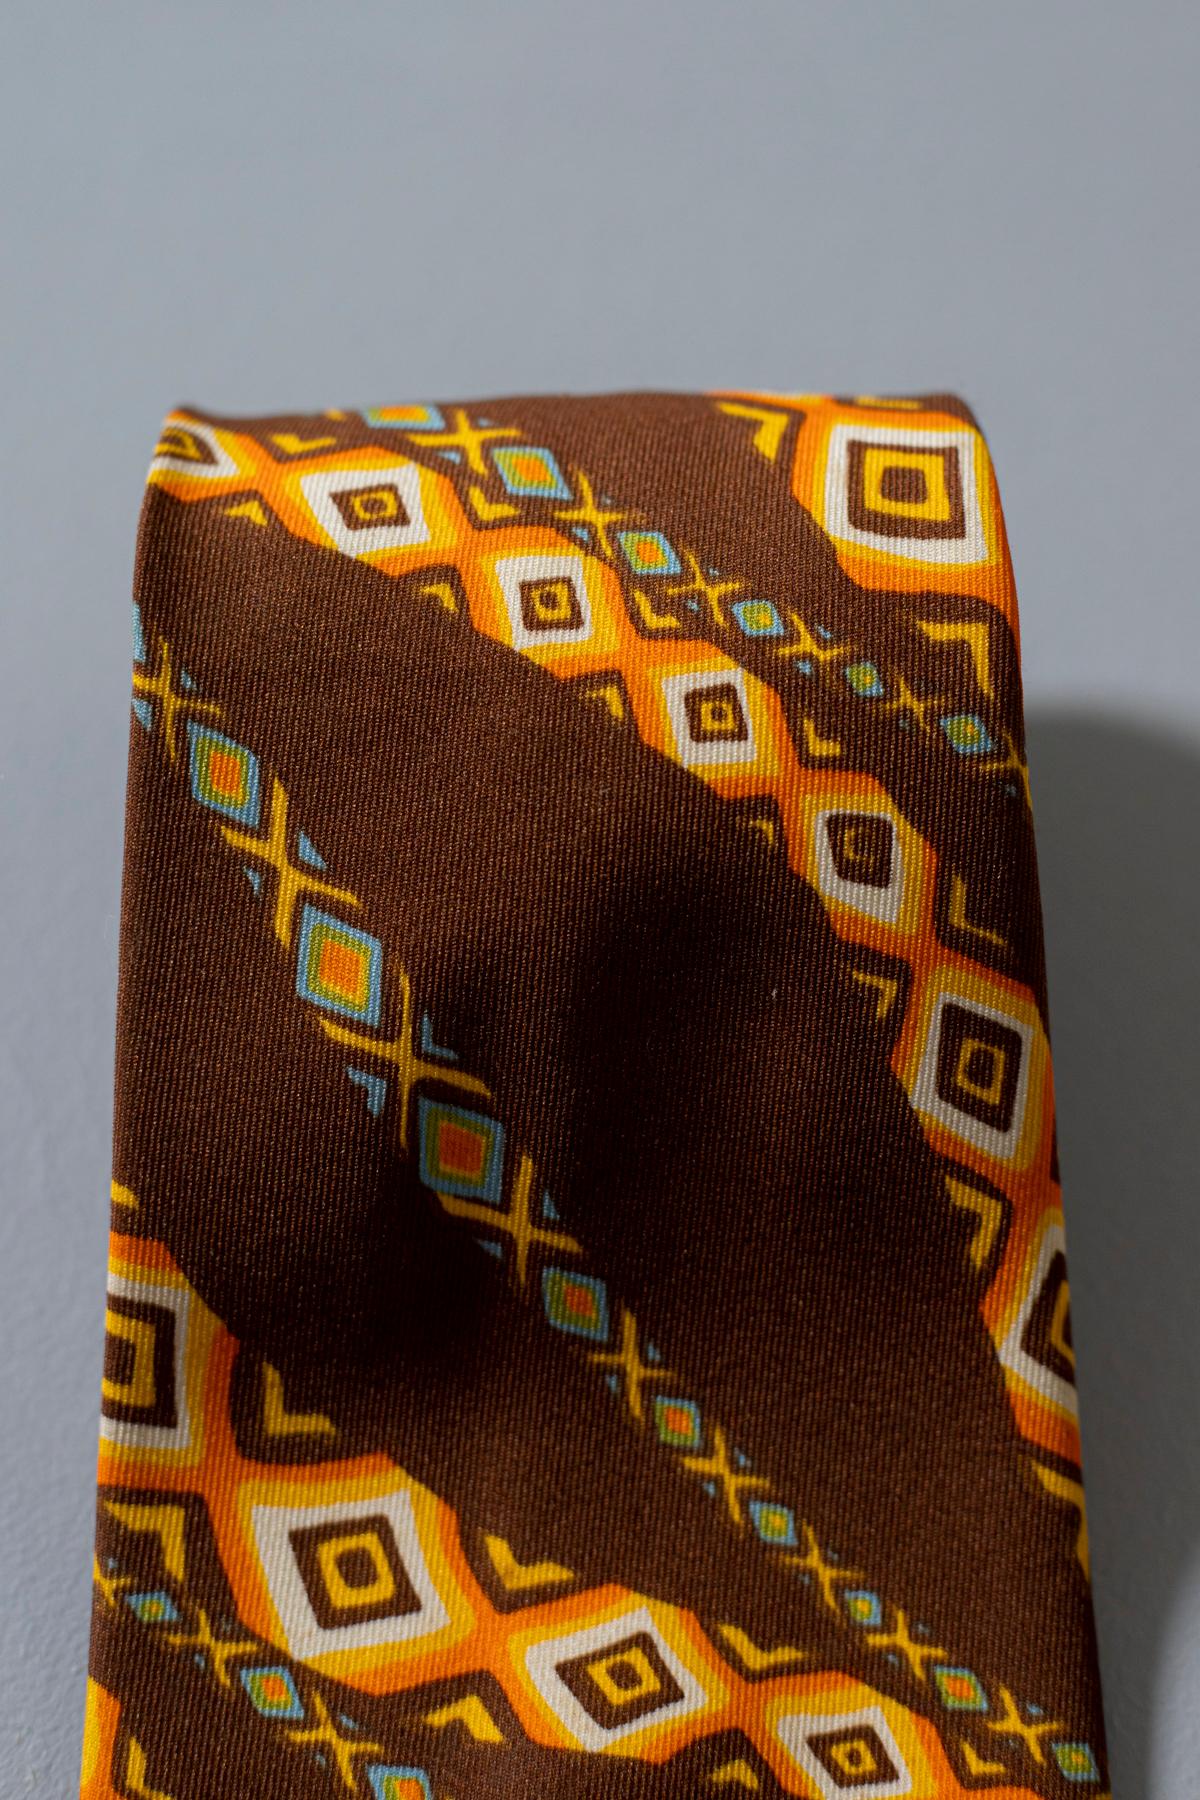 Particular and bizarre vintage tie made by the French designer Jean Claude, it is made of 100% silk. The predominant color is brown and is decorated with wavy yellow stripes with small rhombuses inside. It is a particular accessory ideal for an